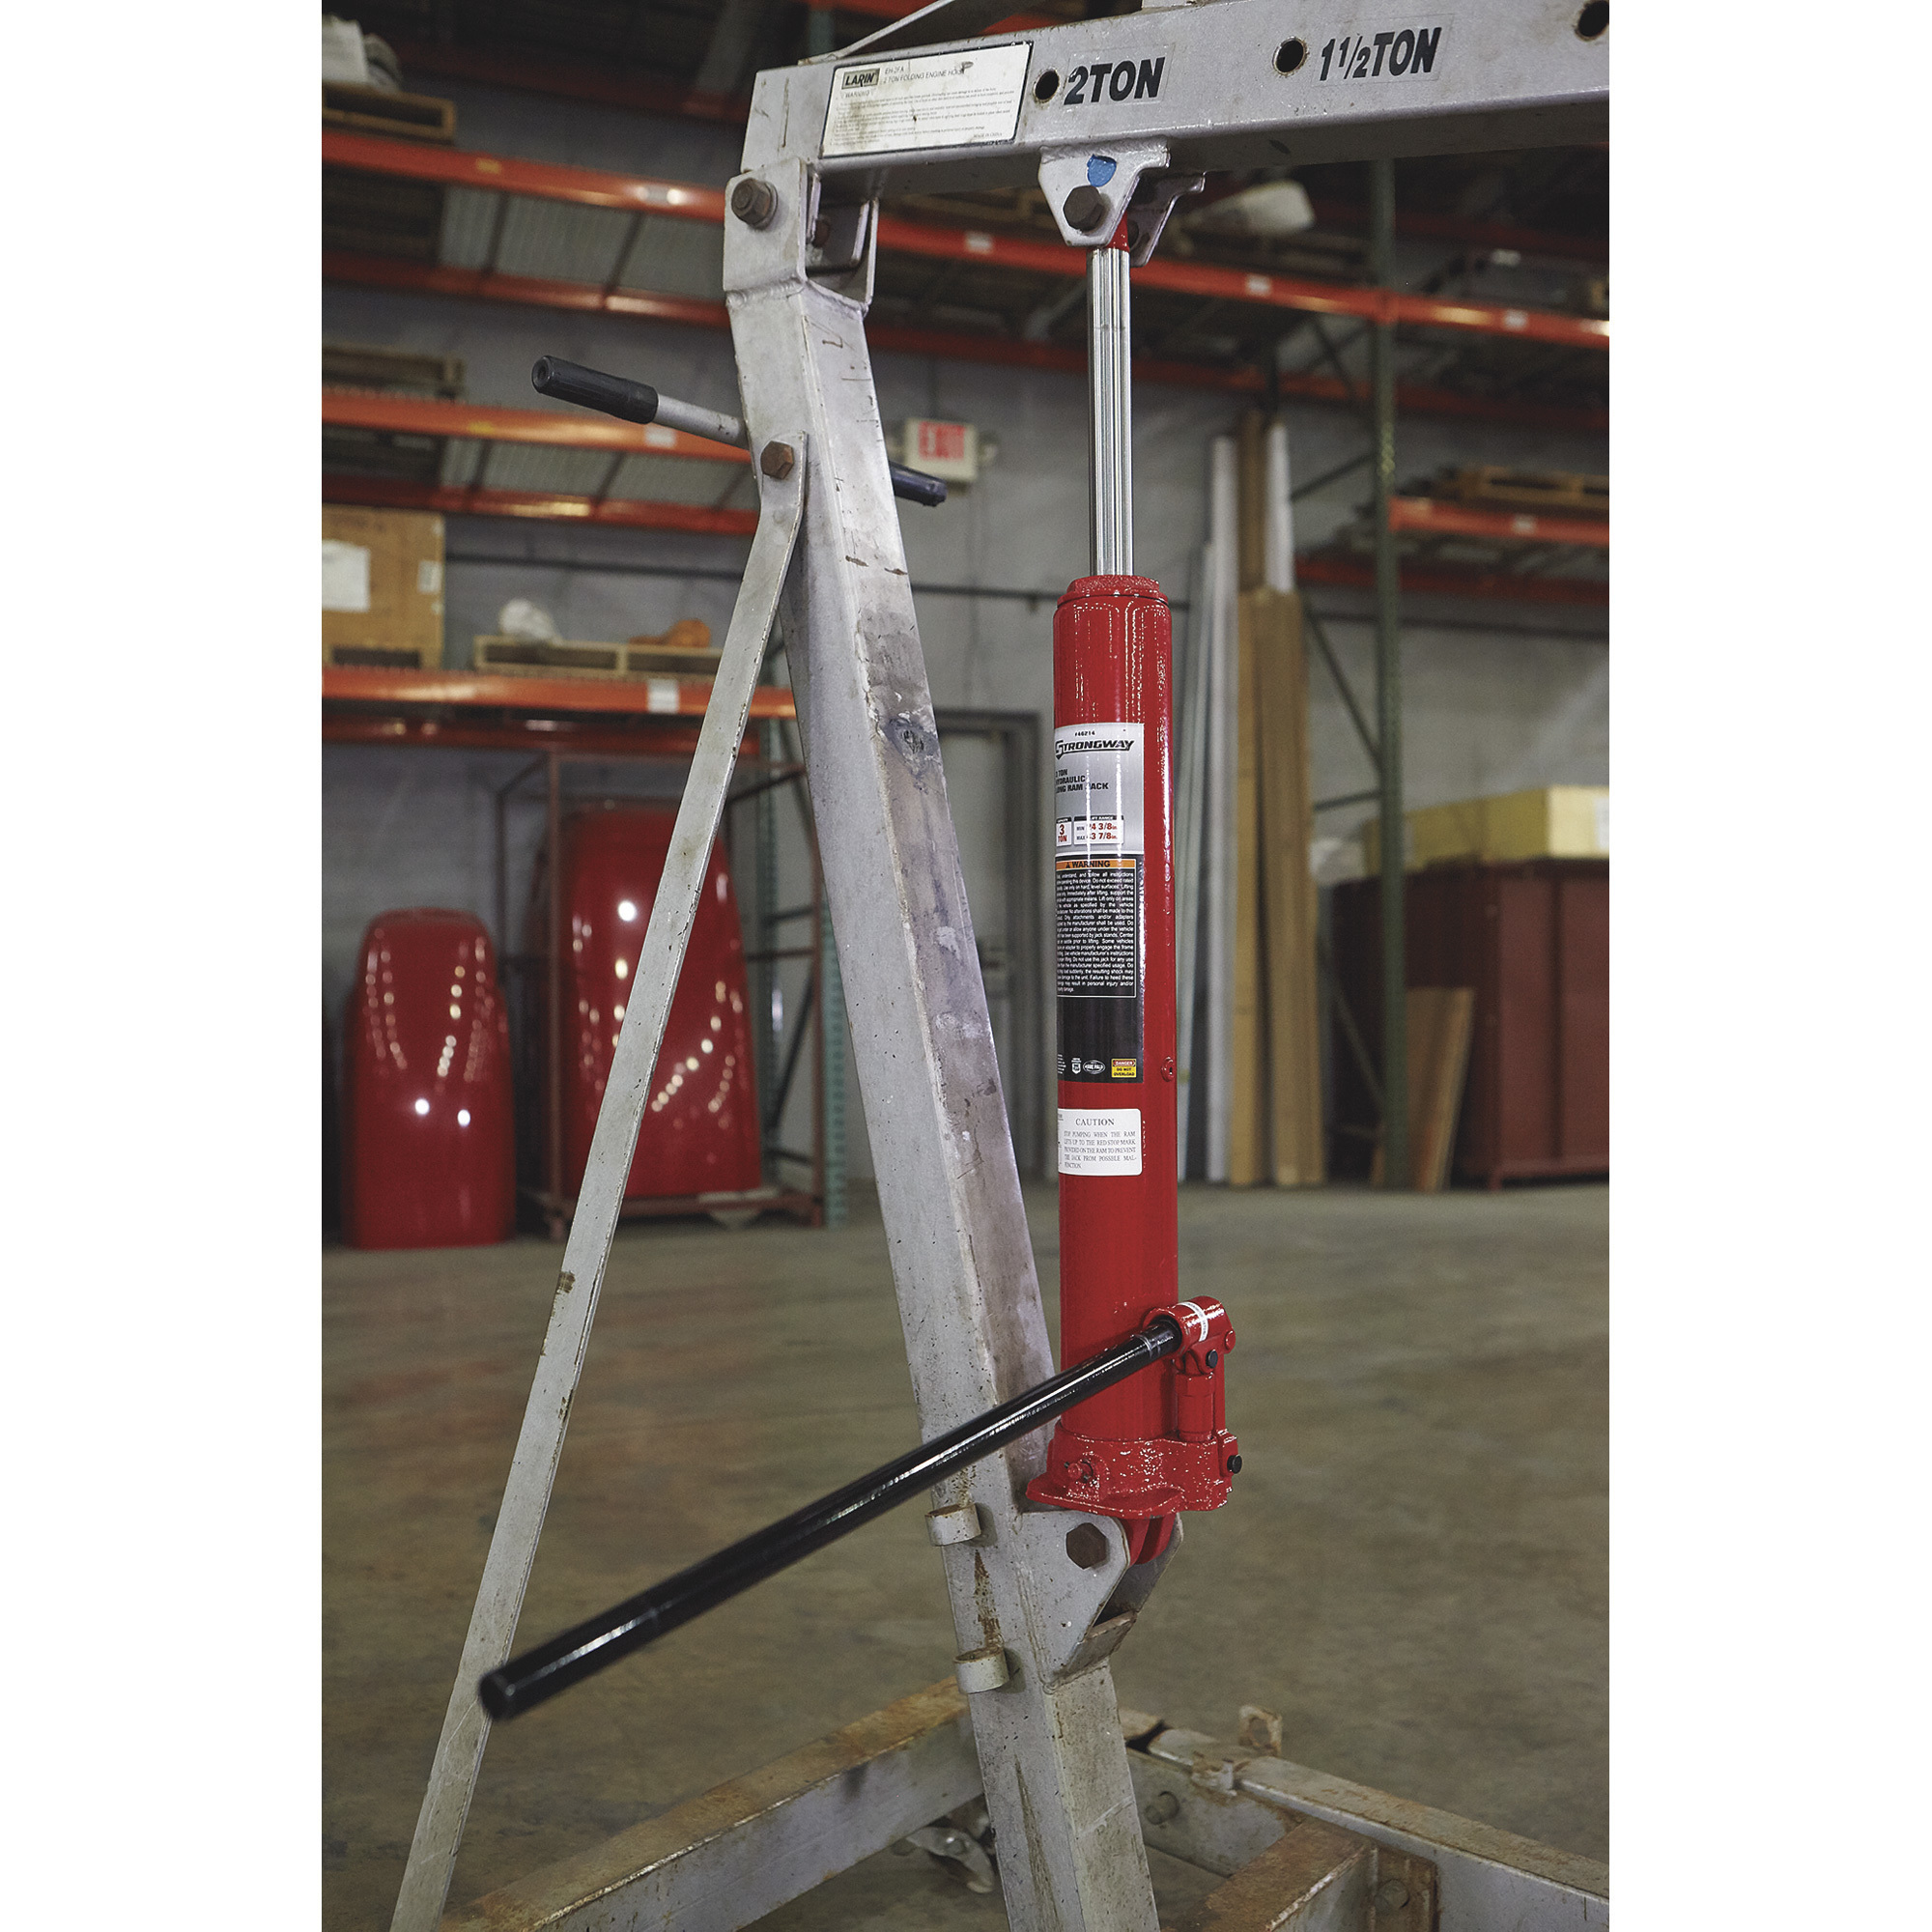 Strongway 3-Ton Long Ram Hydraulic Jack — Single Piston, Clevis Base  Northern Tool